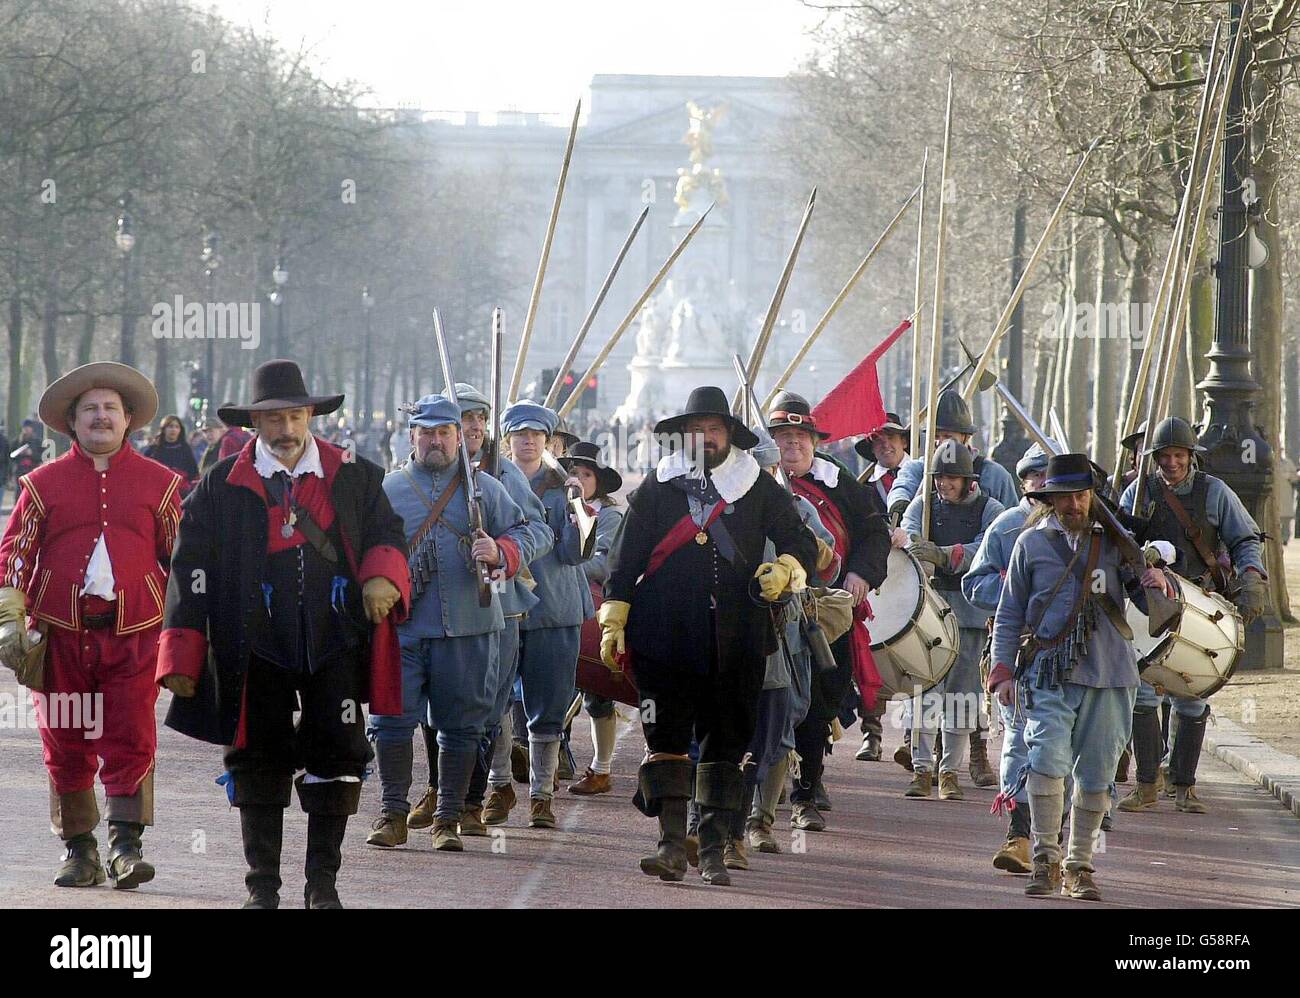 Members from the Civil War Society march down The Mall for a ceremony in central London to mark the beheading of British King Charles I. * Dressed in 17th Century costume the marchers paraded to commemorate the beheading which happened on January 30 1649. Stock Photo